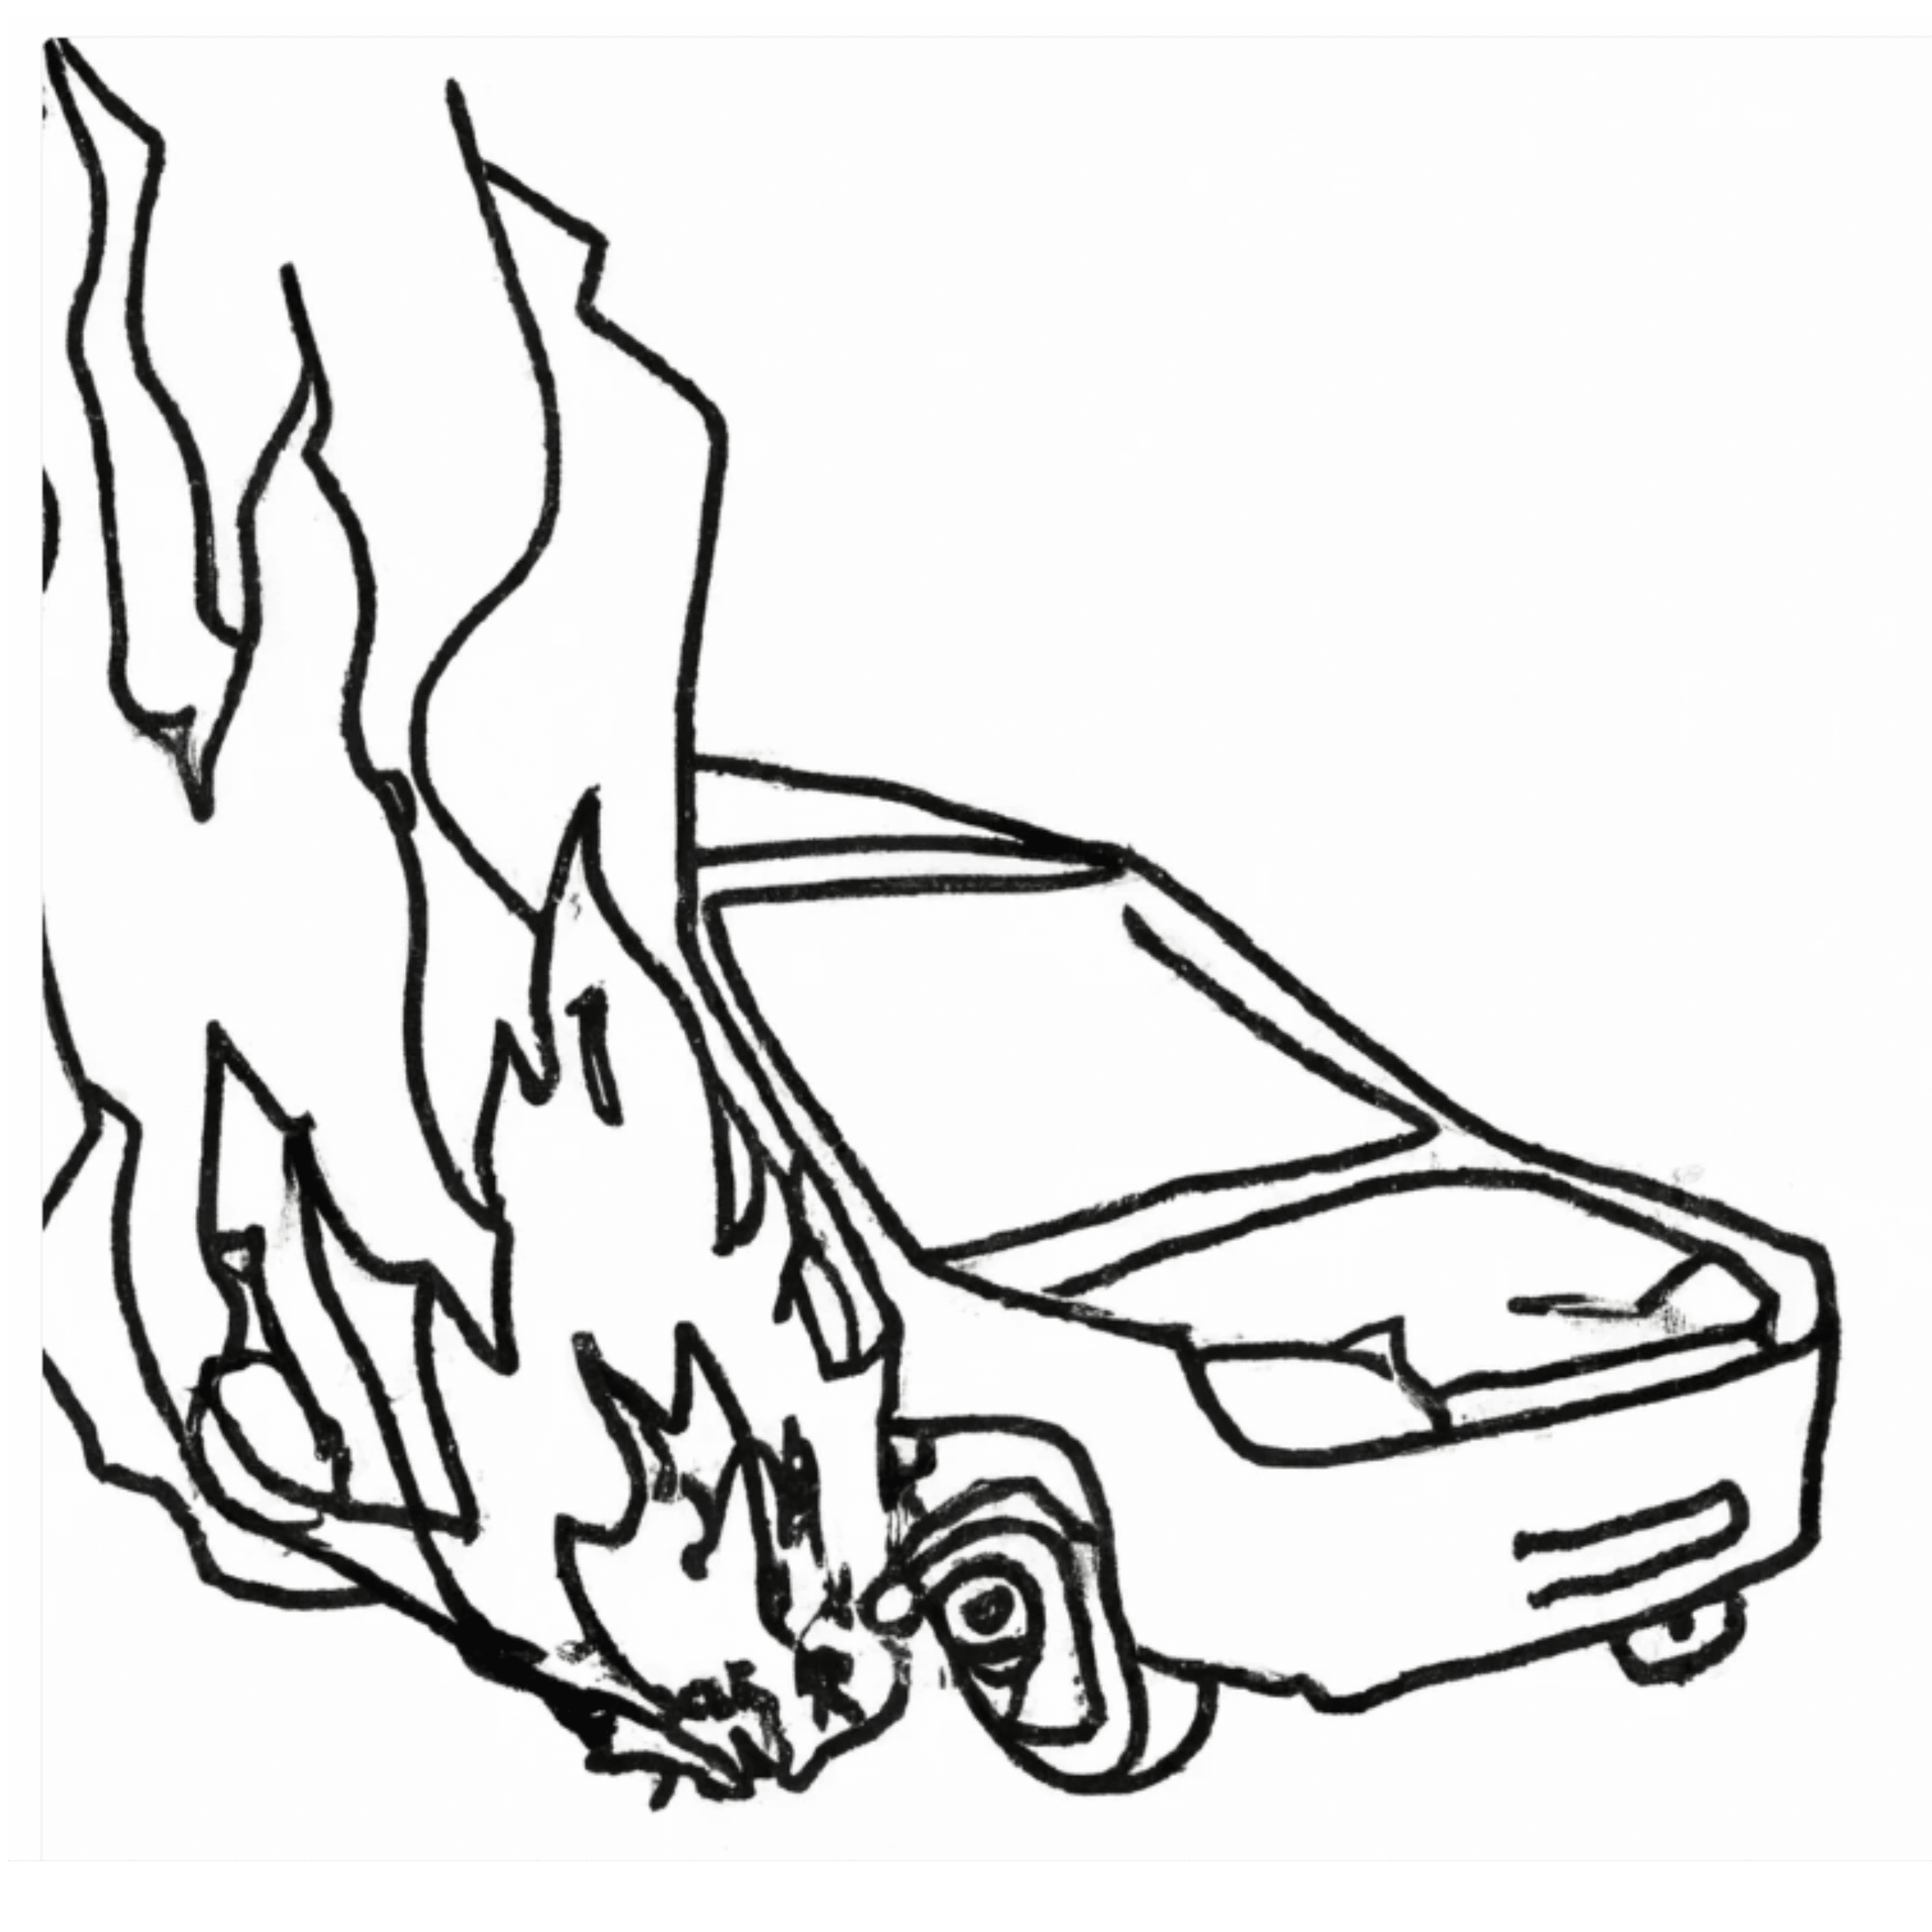 Line drawing of a burning car